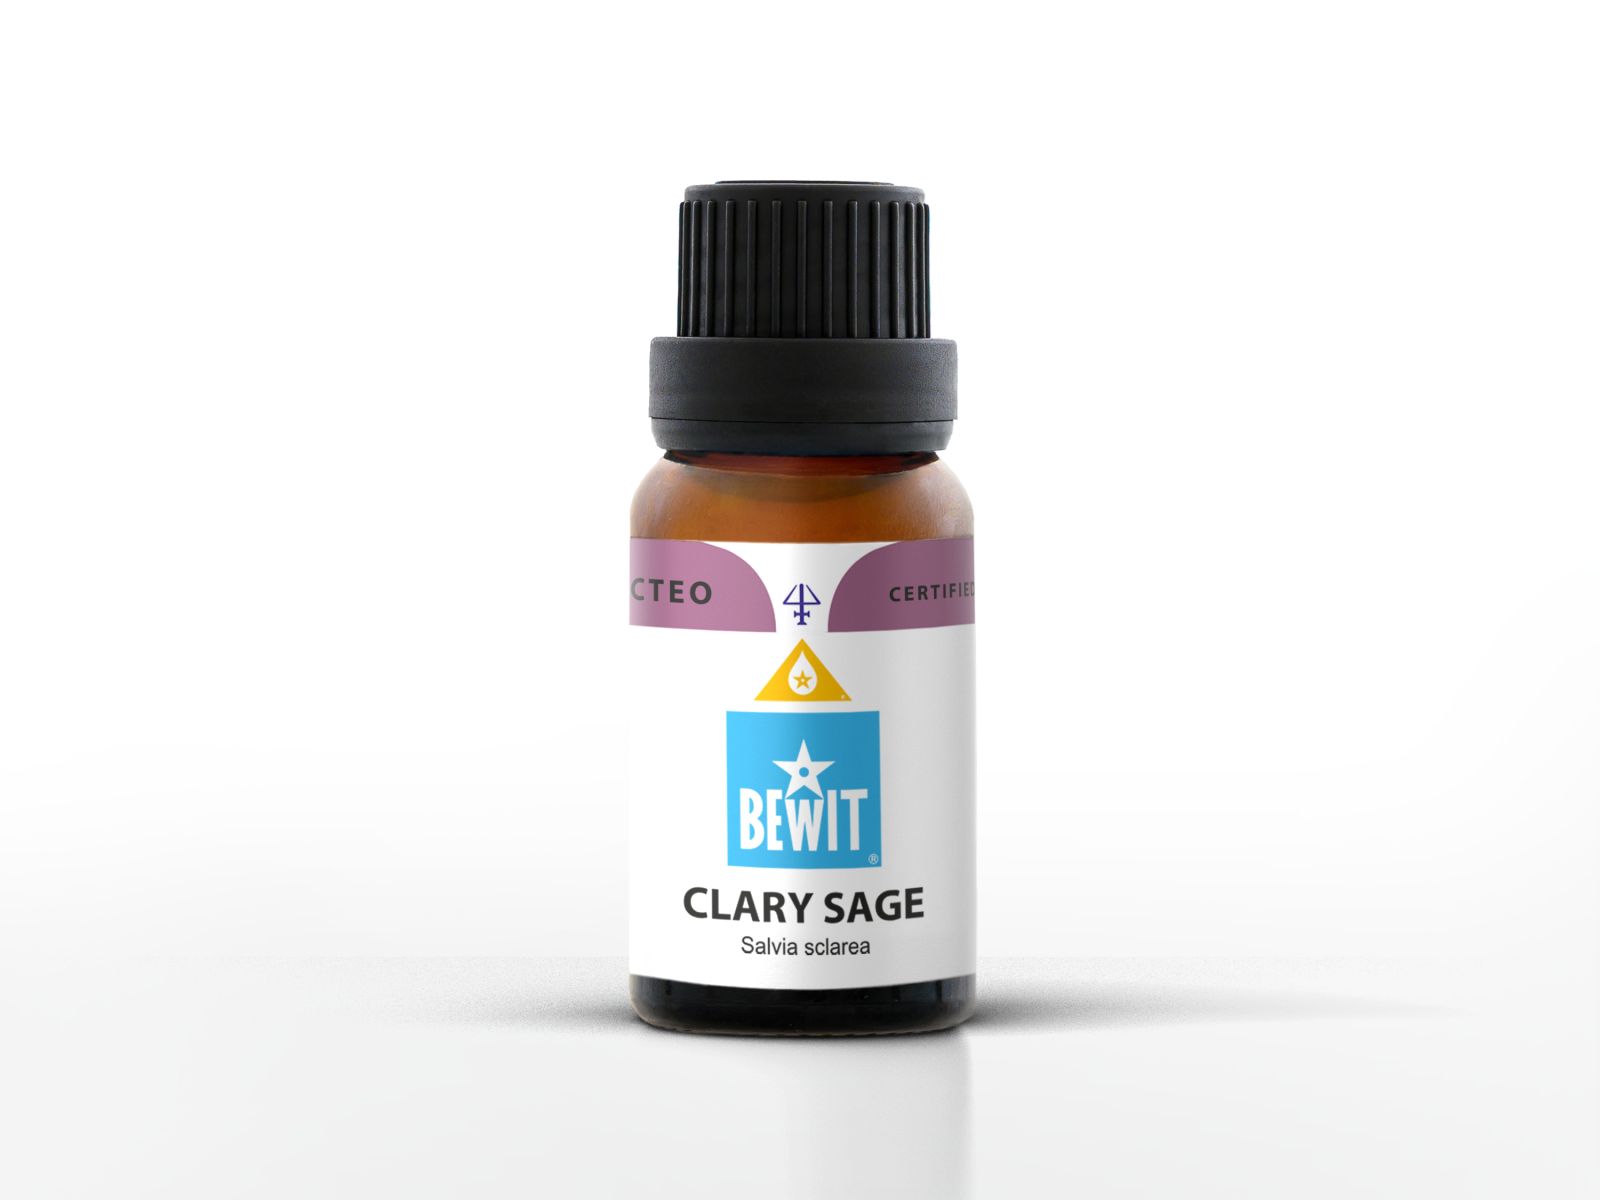 BEWIT Clary sage - It is a 100% pure essential oil - 3